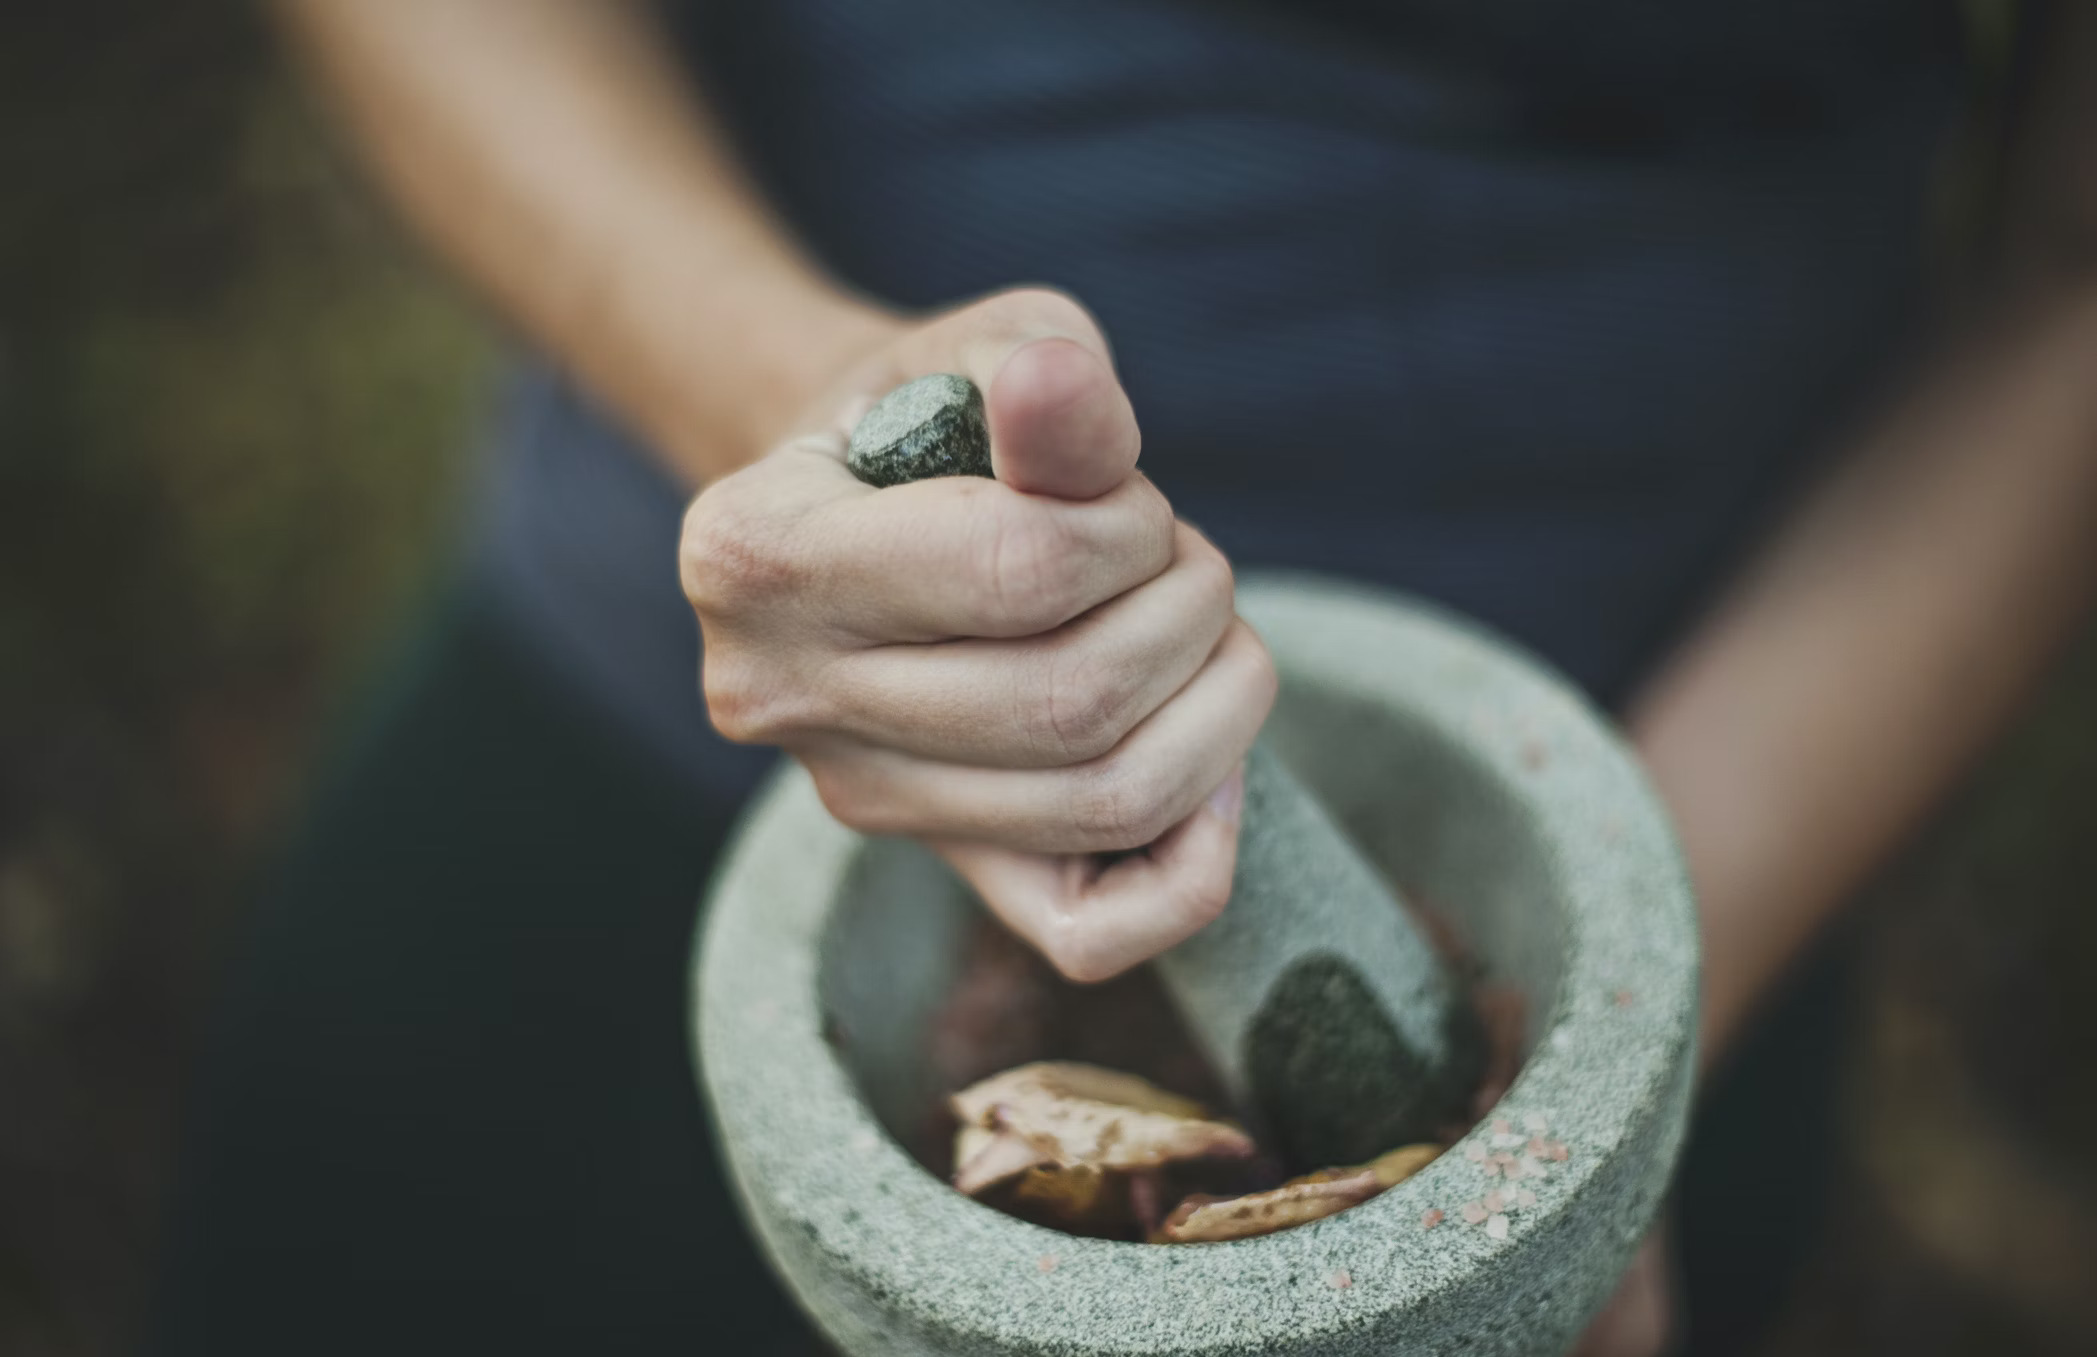 Image of a person grinding spices.